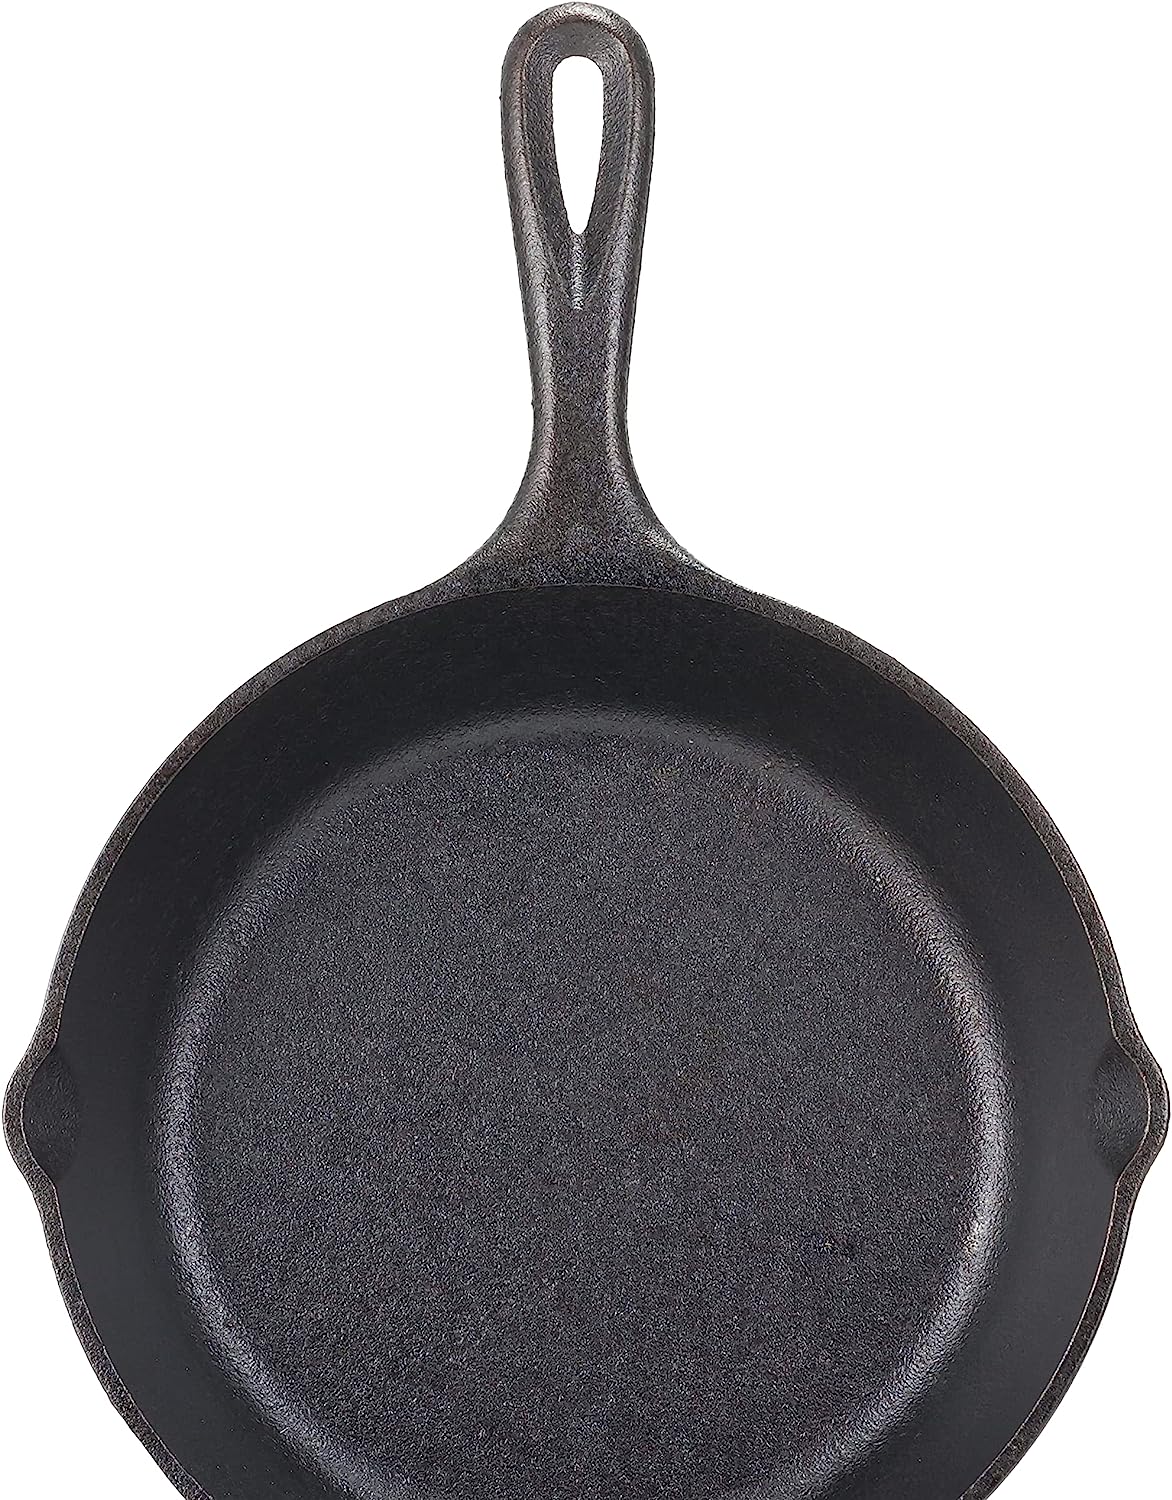 https://bigbigmart.com/wp-content/uploads/2023/07/Lodge-15-Inch-Cast-Iron-Pre-Seasoned-Skillet-%E2%80%93-Signature-Teardrop-Handle-Use-in-the-Oven-on-the-Stove-on-the-Grill-or-Over-a-Campfire-Black9.jpg